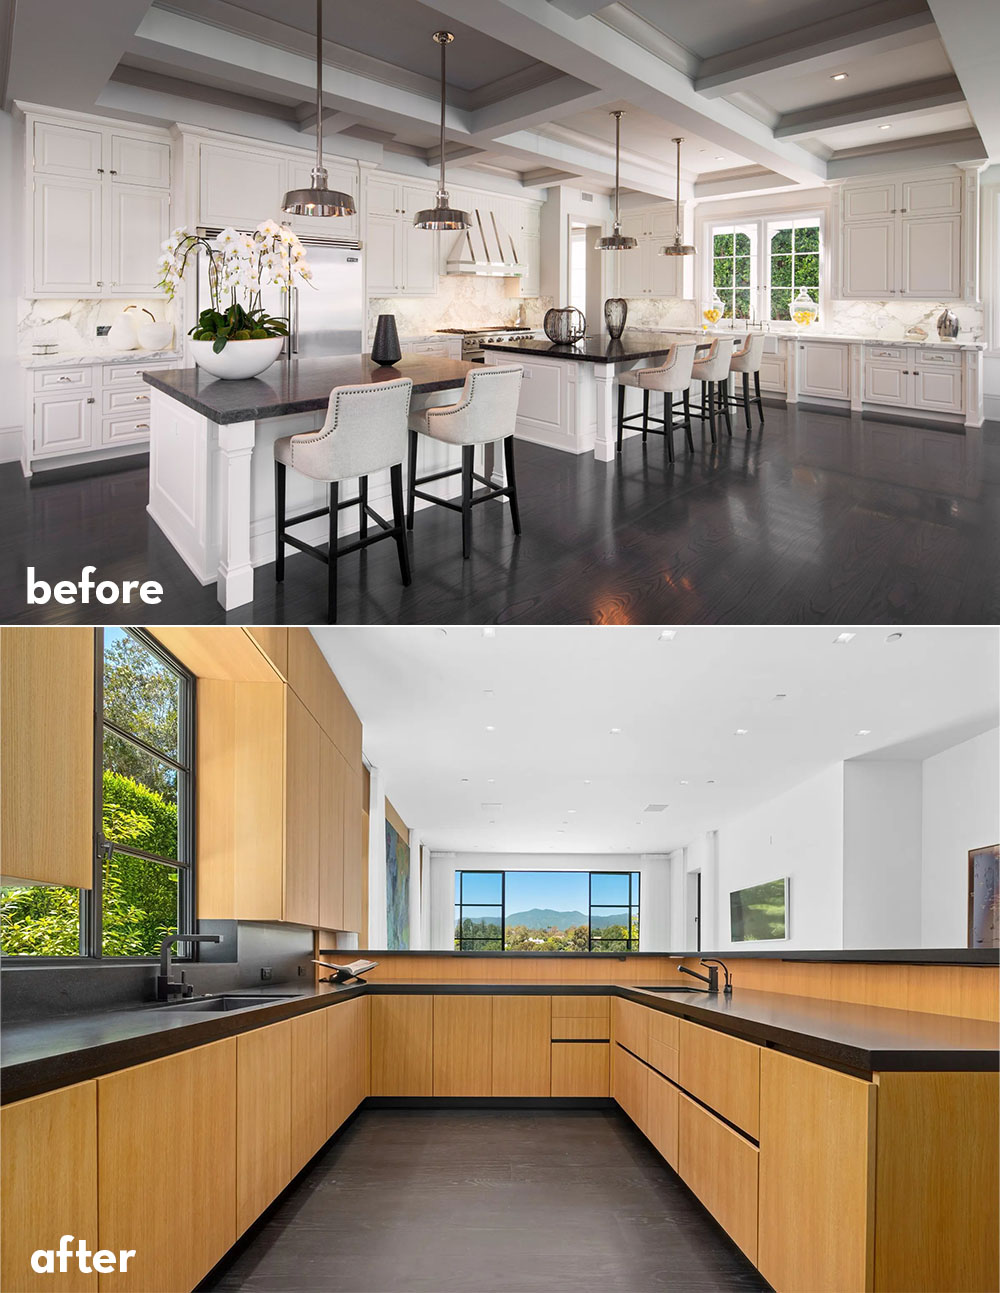 kitchen before and after redesign